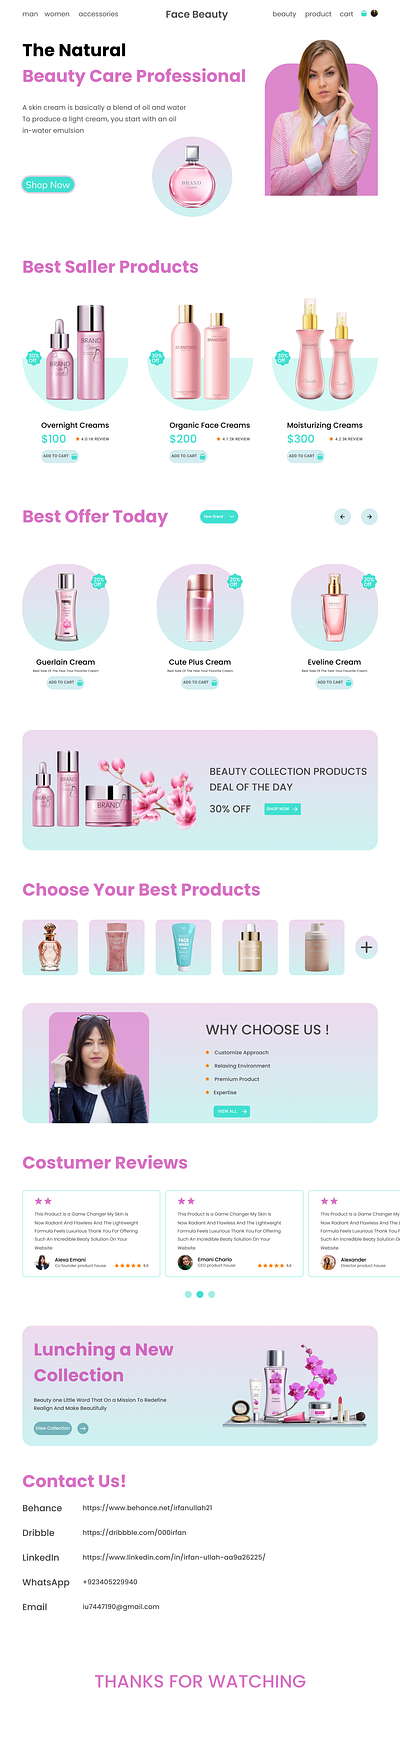 face beauty products figma landing page ui user interface ux ux design wwebsite